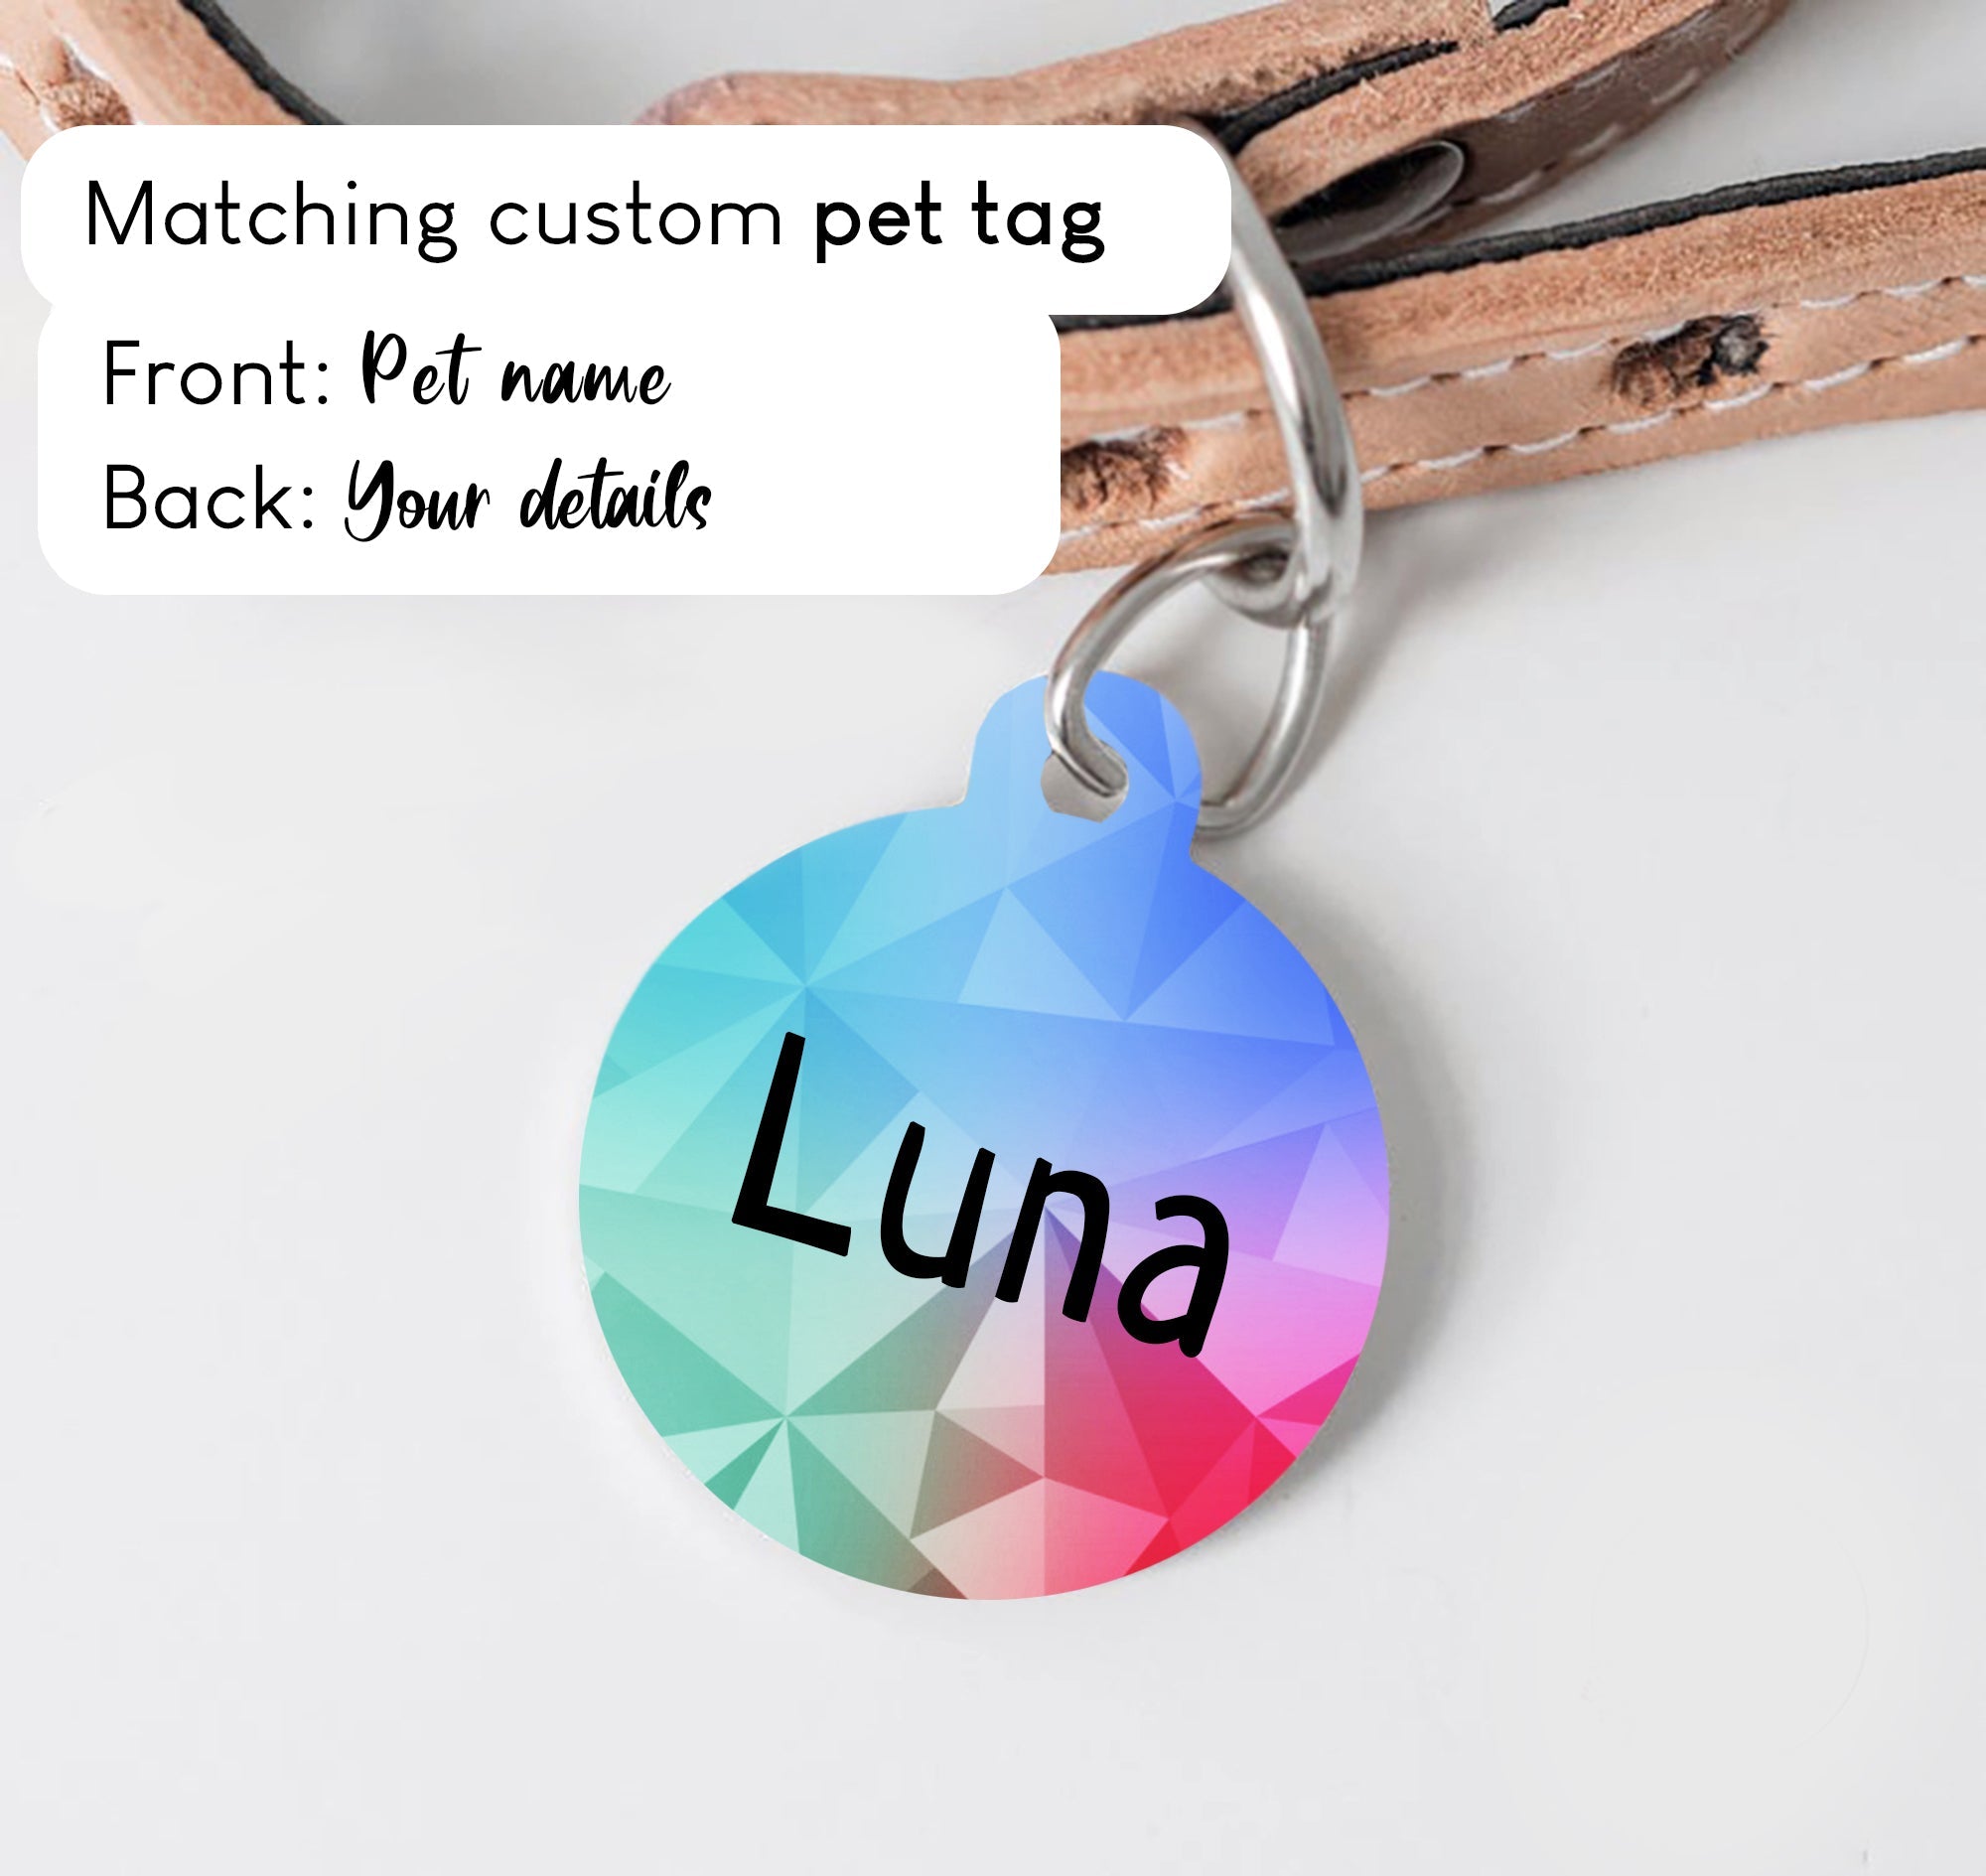 Abstract Colorful Triangles Dog Collar - S-L sizes with custom matching pet tag - Adventures of Rubi